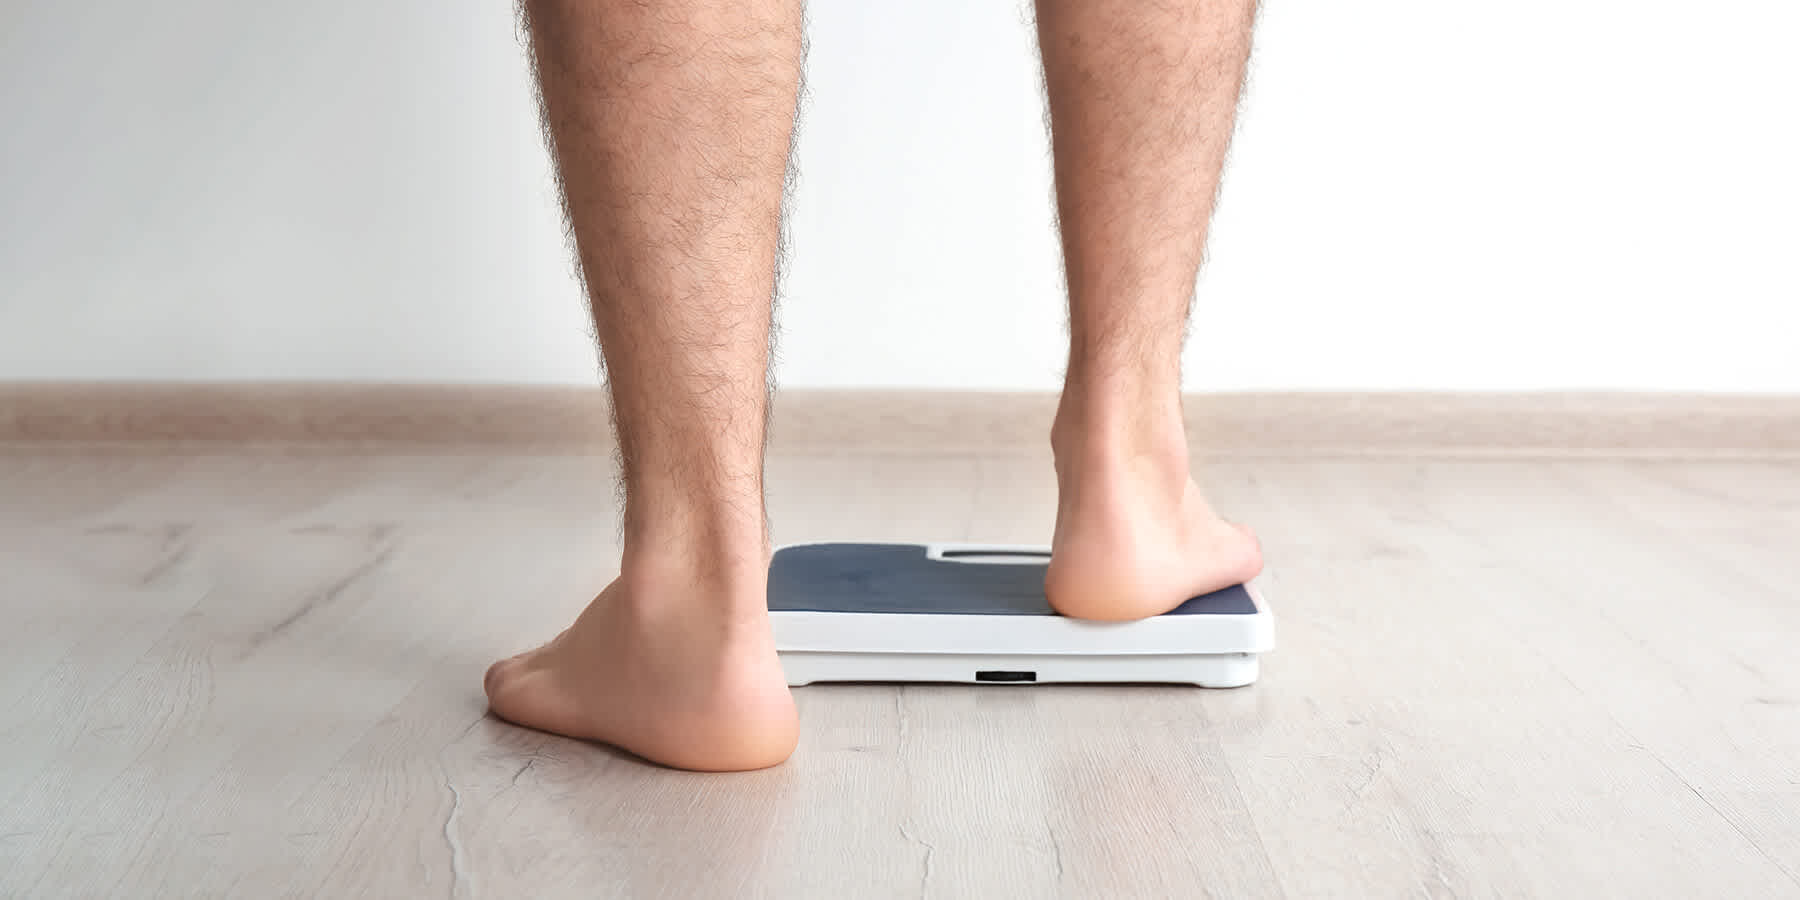 Man checking weight with bathroom scale and wondering which diabetic drug causes the most weight loss